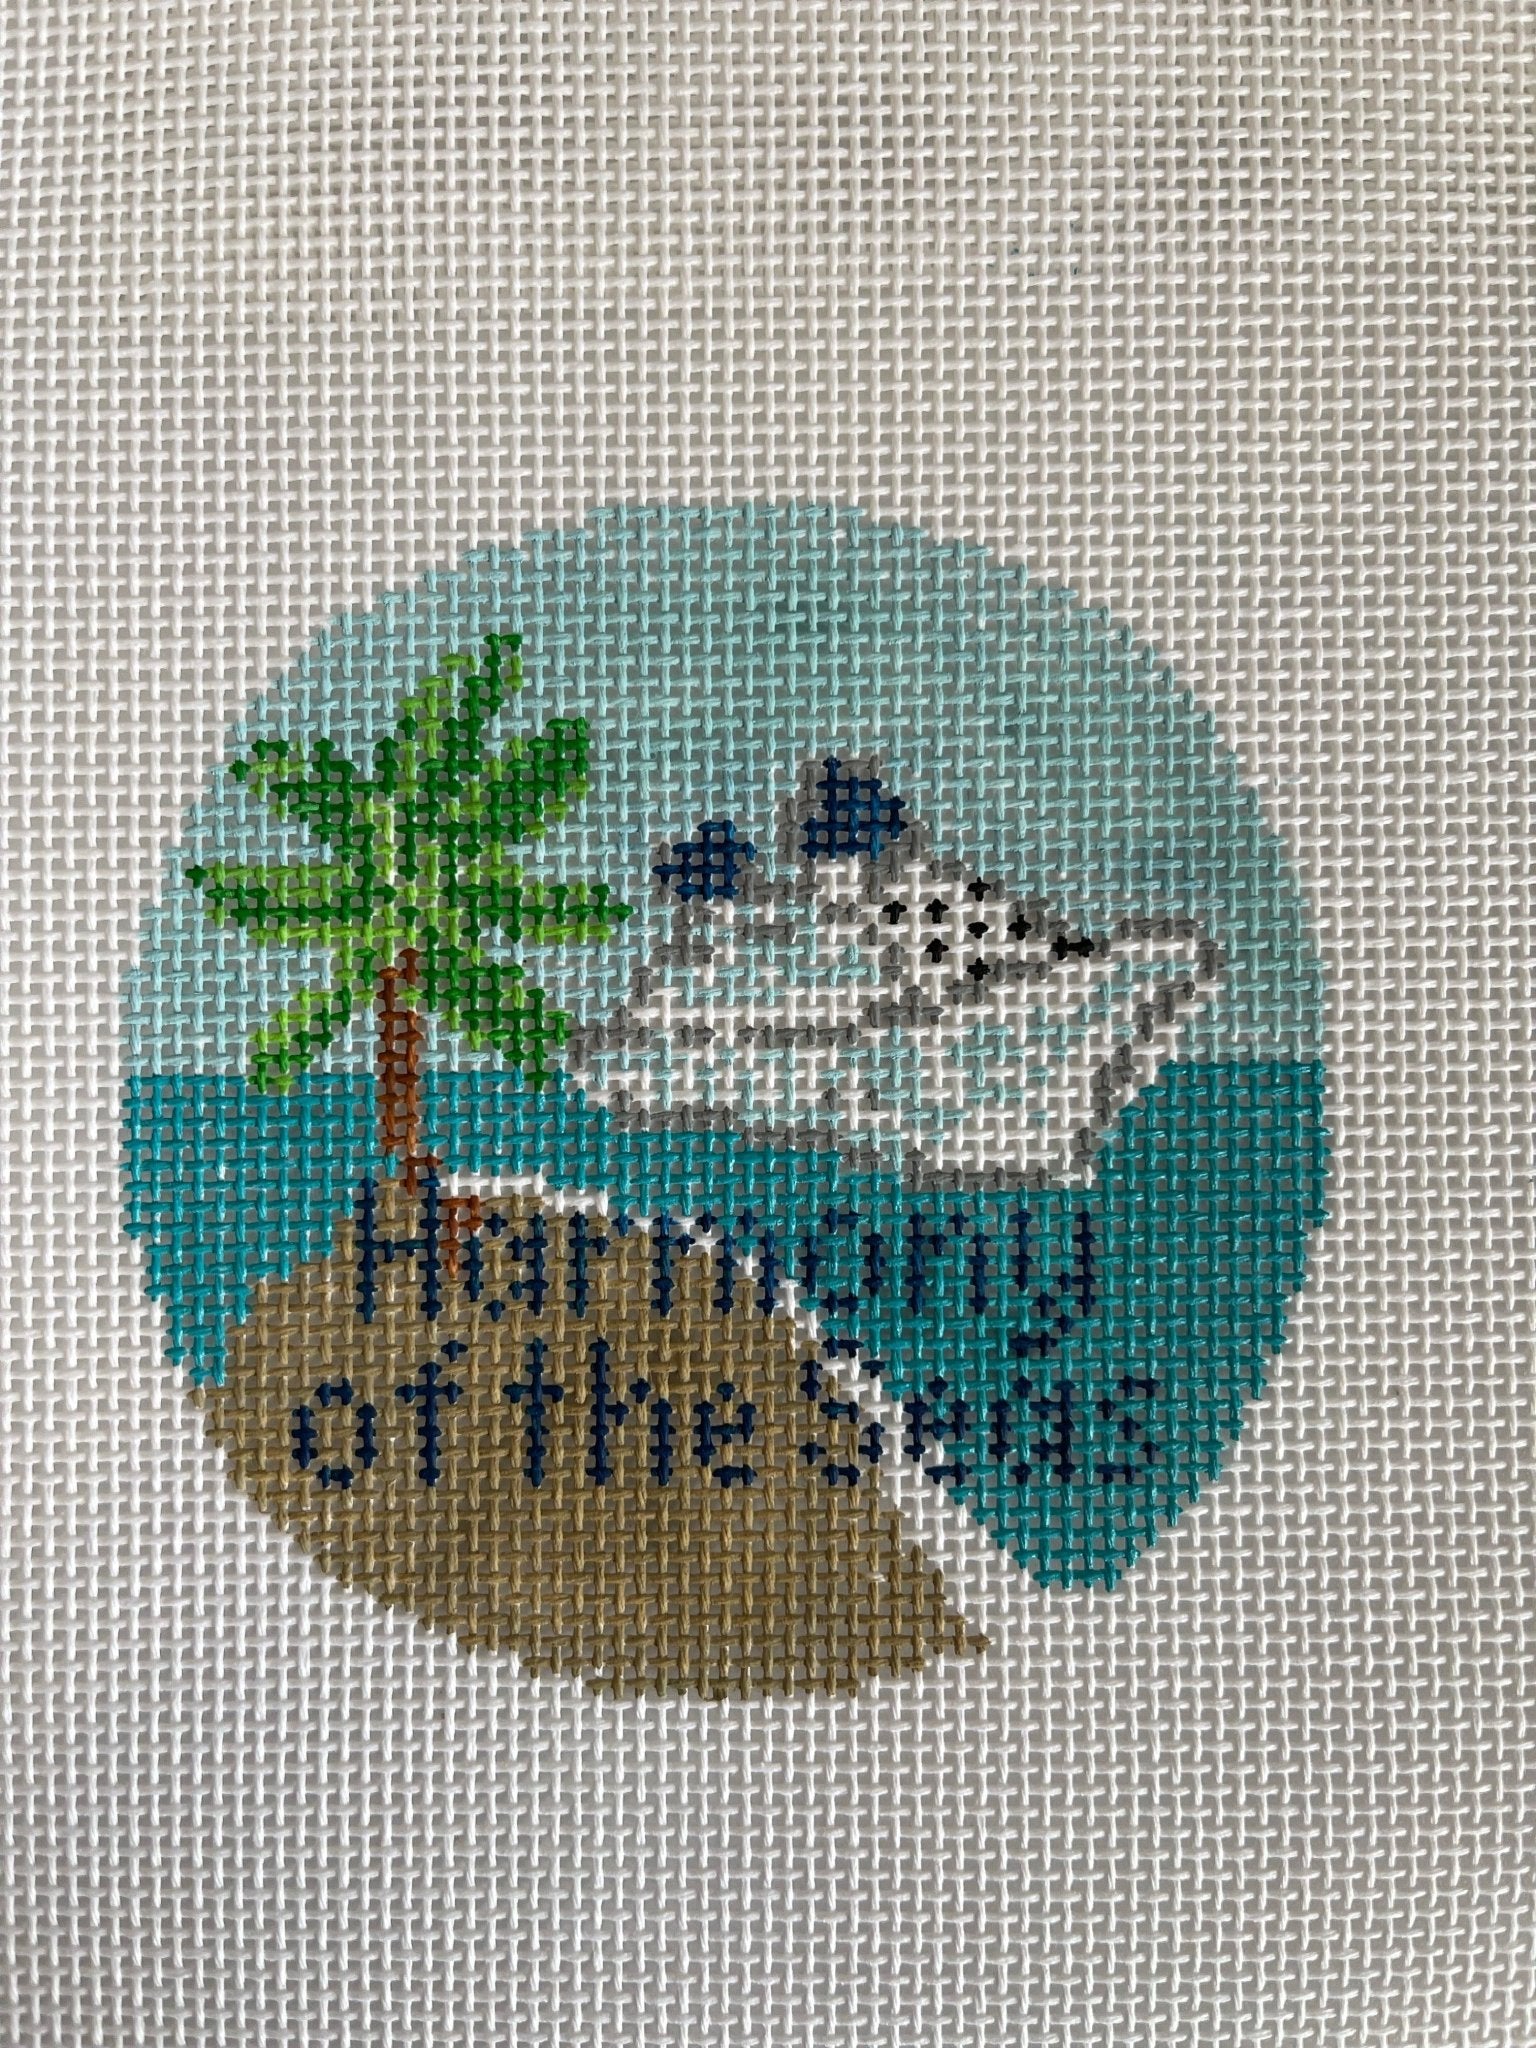 Cruise Ship ornament canvas - Needlepoint by Laura